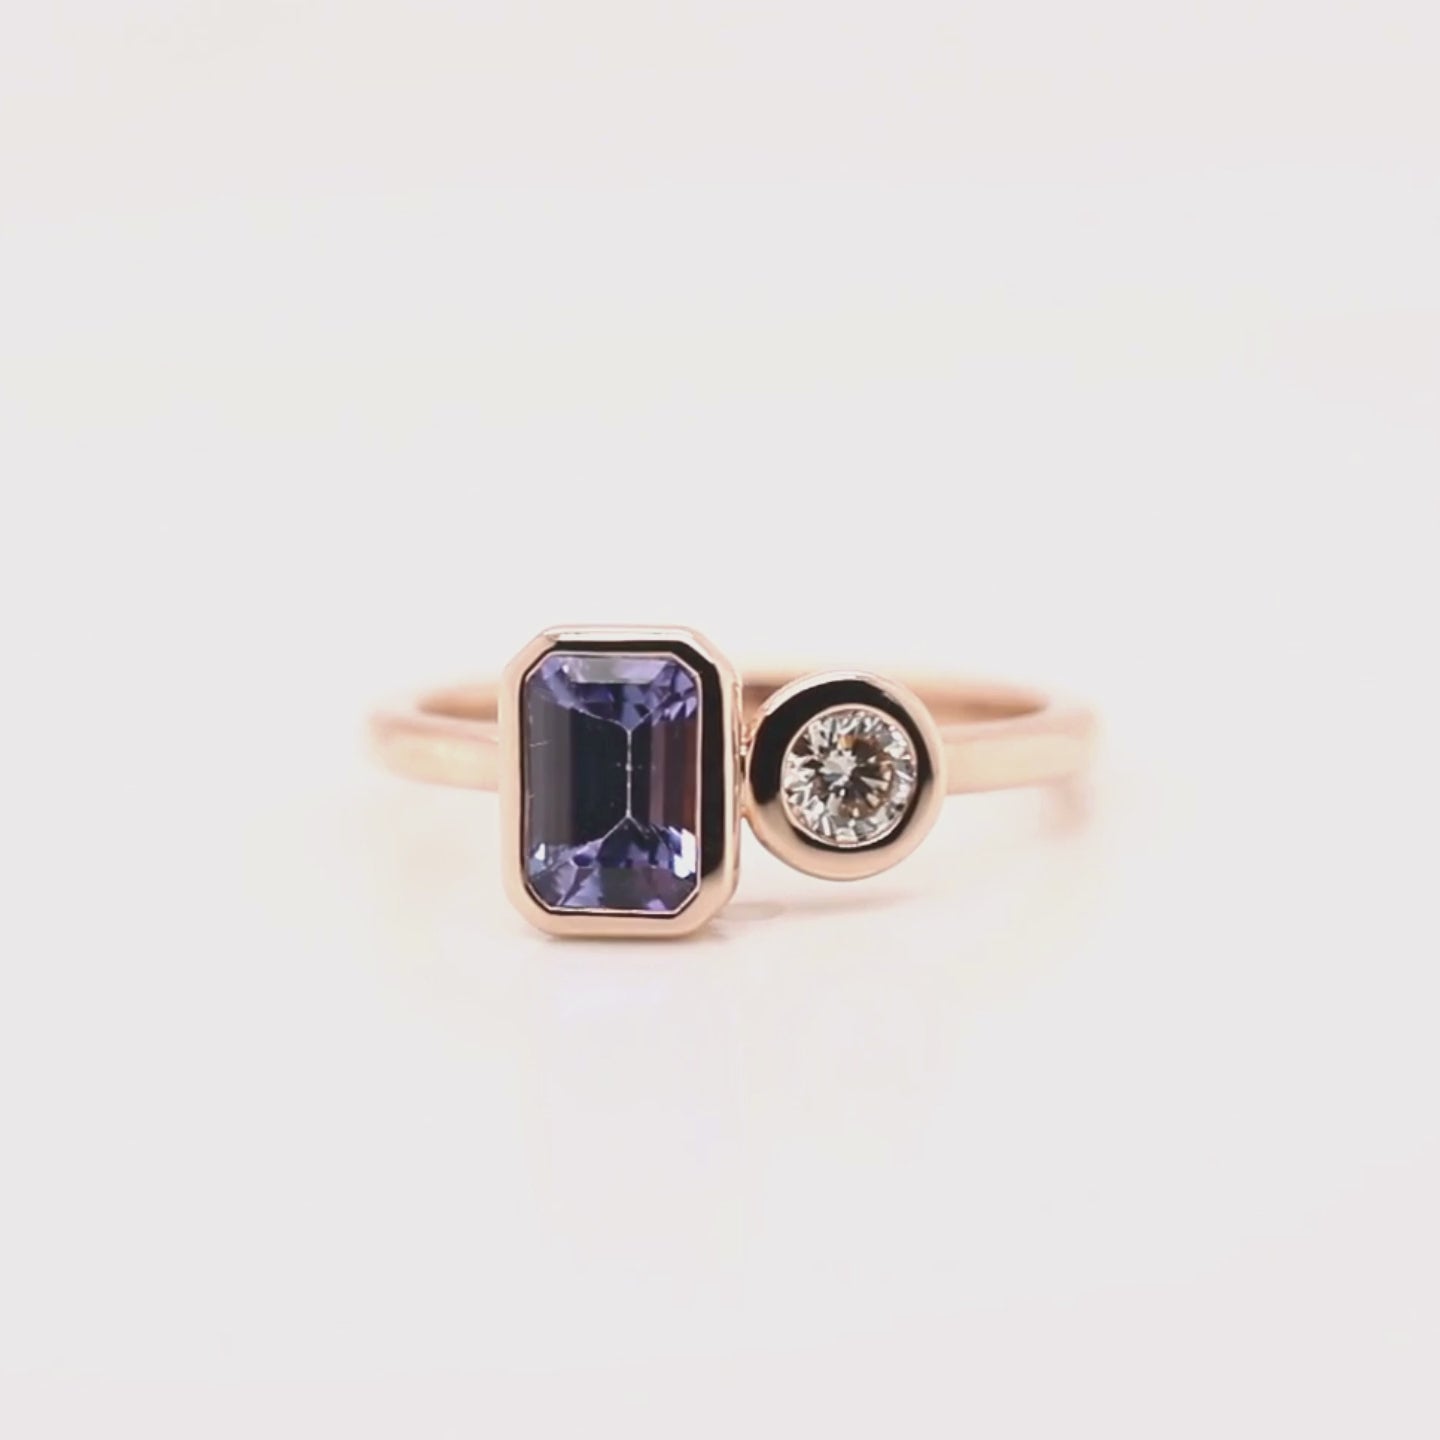 Toi et Moi Ring with an Emerald Cut Tanzanite & White Round Diamond - Made to Order, Choose Your Gold Tone